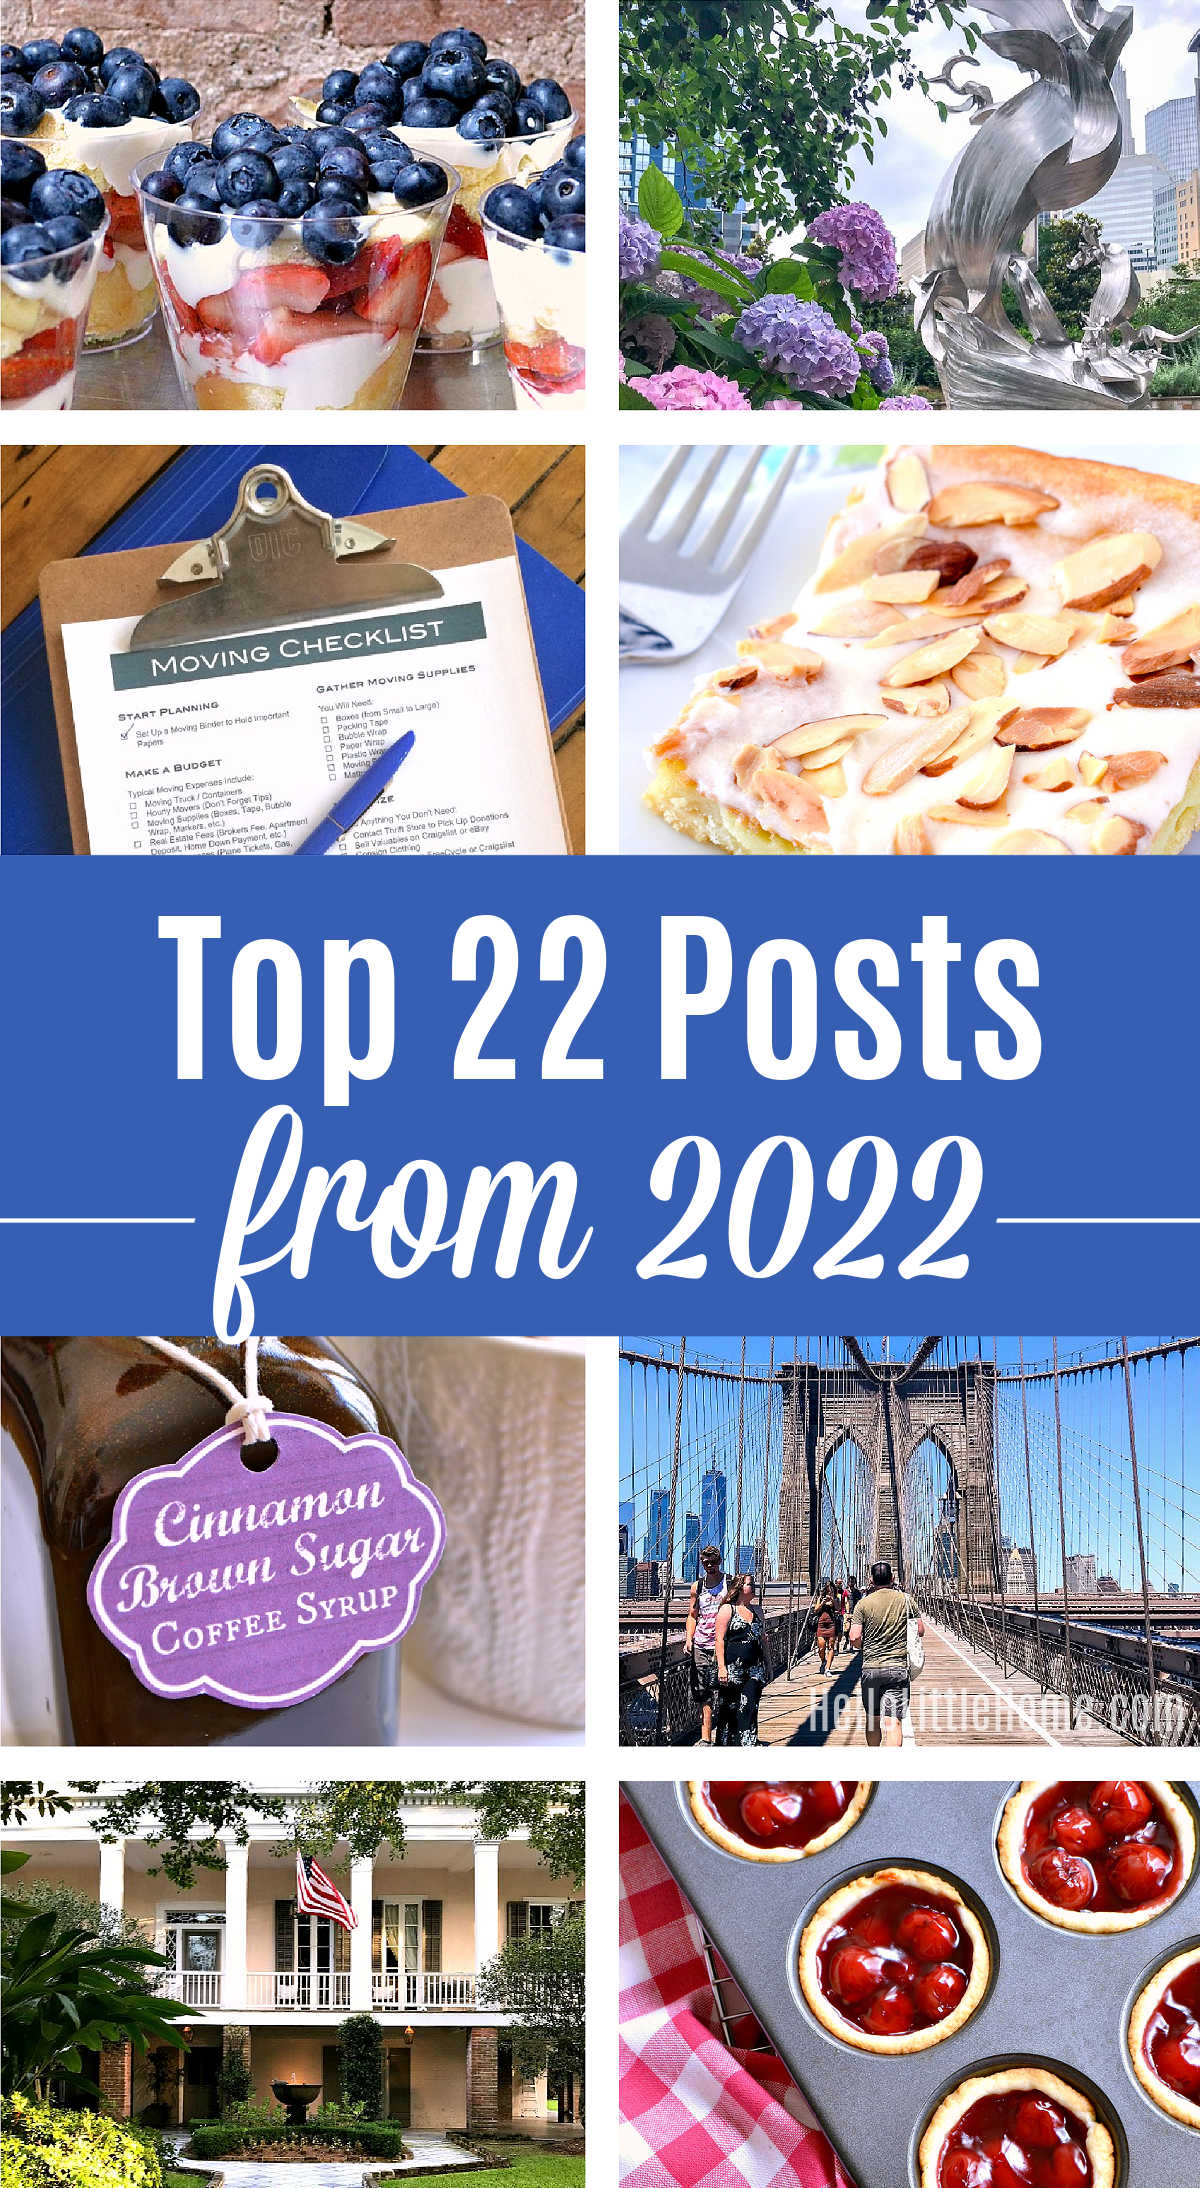 22 Most Popular Posts from 2022